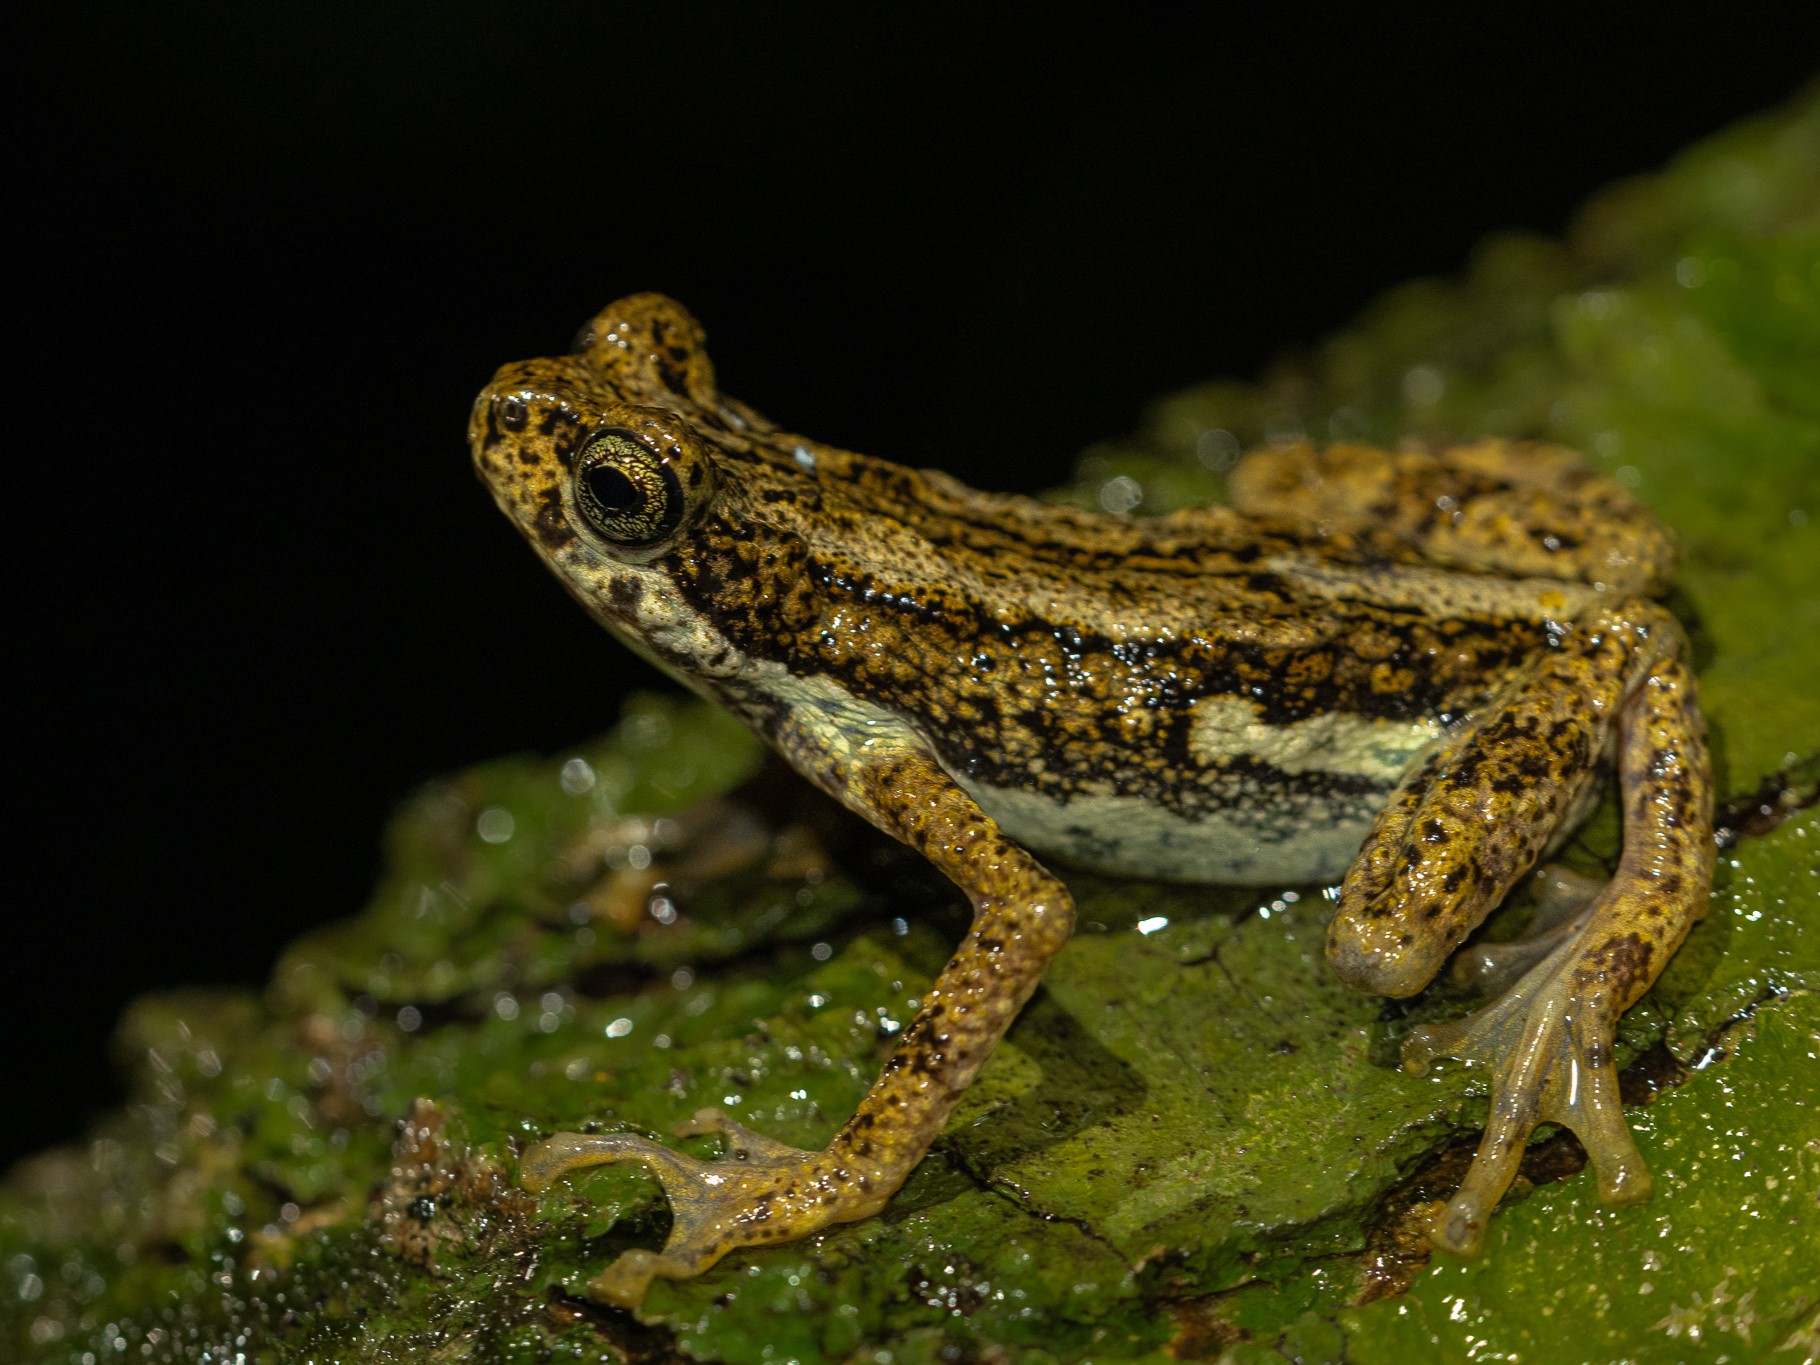 Malbar Toad from the Western Ghats